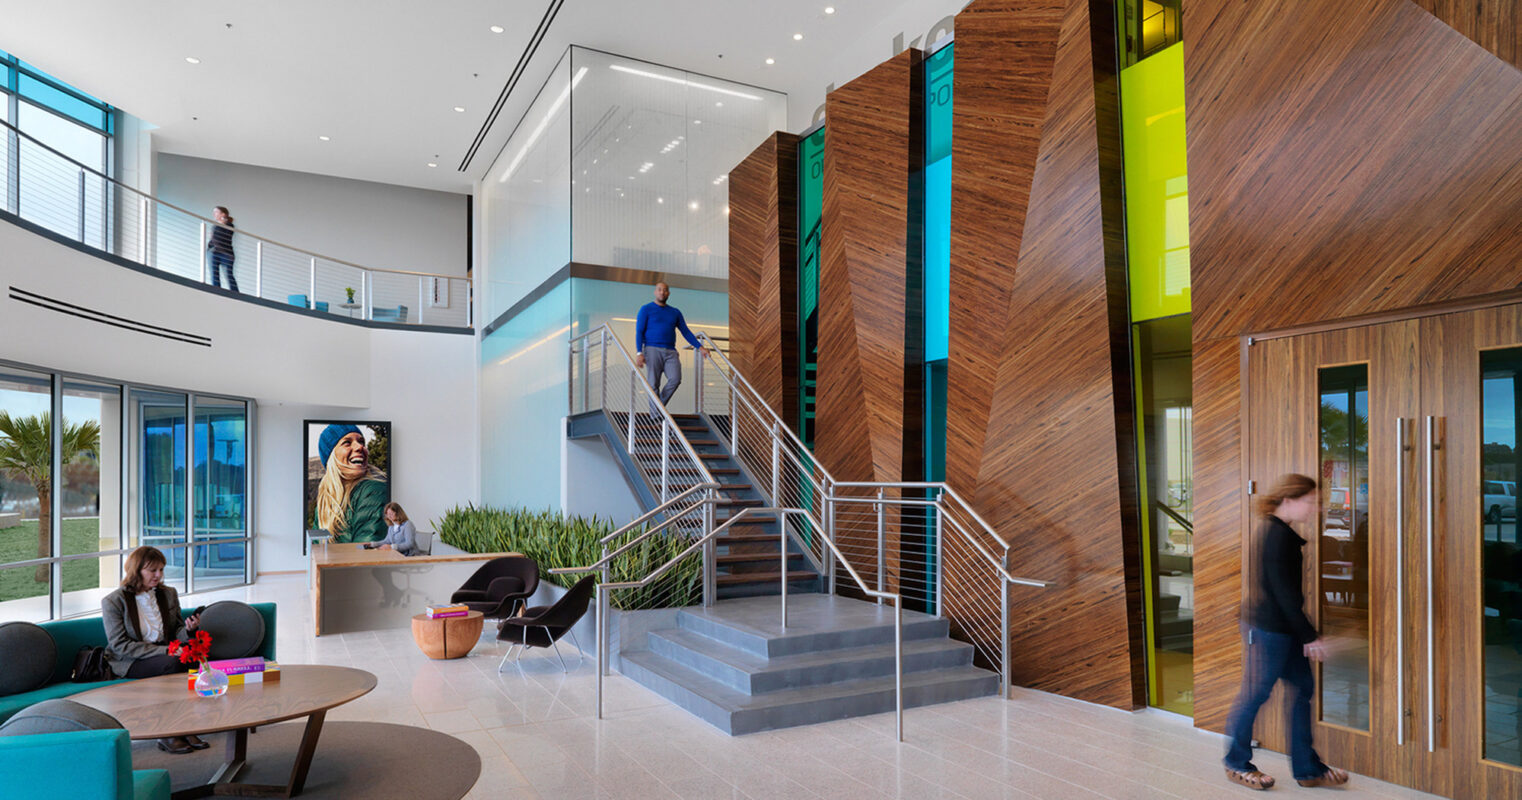 Modern office lobby with high ceilings and a spacious layout. A striking wood feature wall adds warmth, complemented by colorful glass panels. Contemporary furniture provides casual seating, and a metal staircase offers access to the second level, enhancing the airy and dynamic design aesthetic.